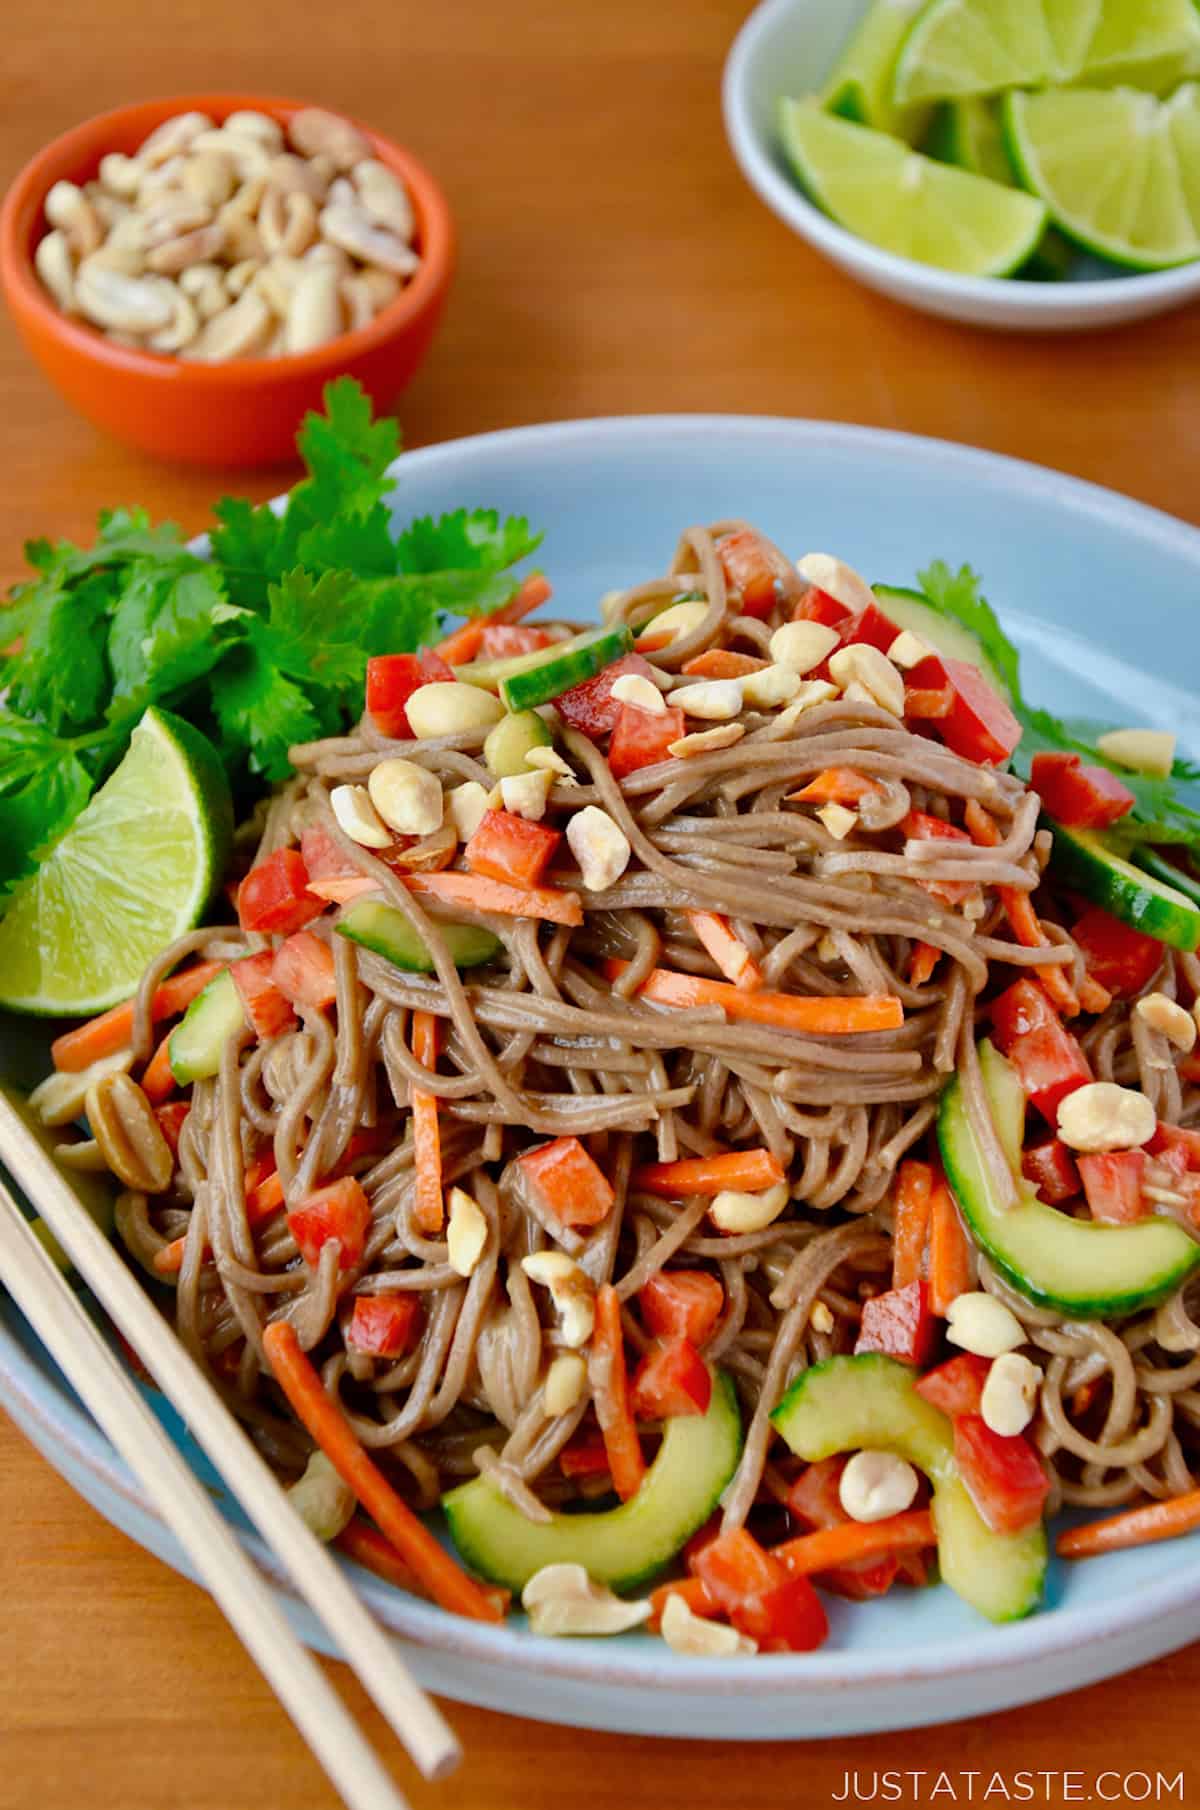 You need just 30 minutes to throw together this Soba Noodle Salad with Peanut Dressing. It’s loaded with veggies and tossed in a limey, nutty dressing. It’s an any time salad: good eaten right away or for lunch the next day.